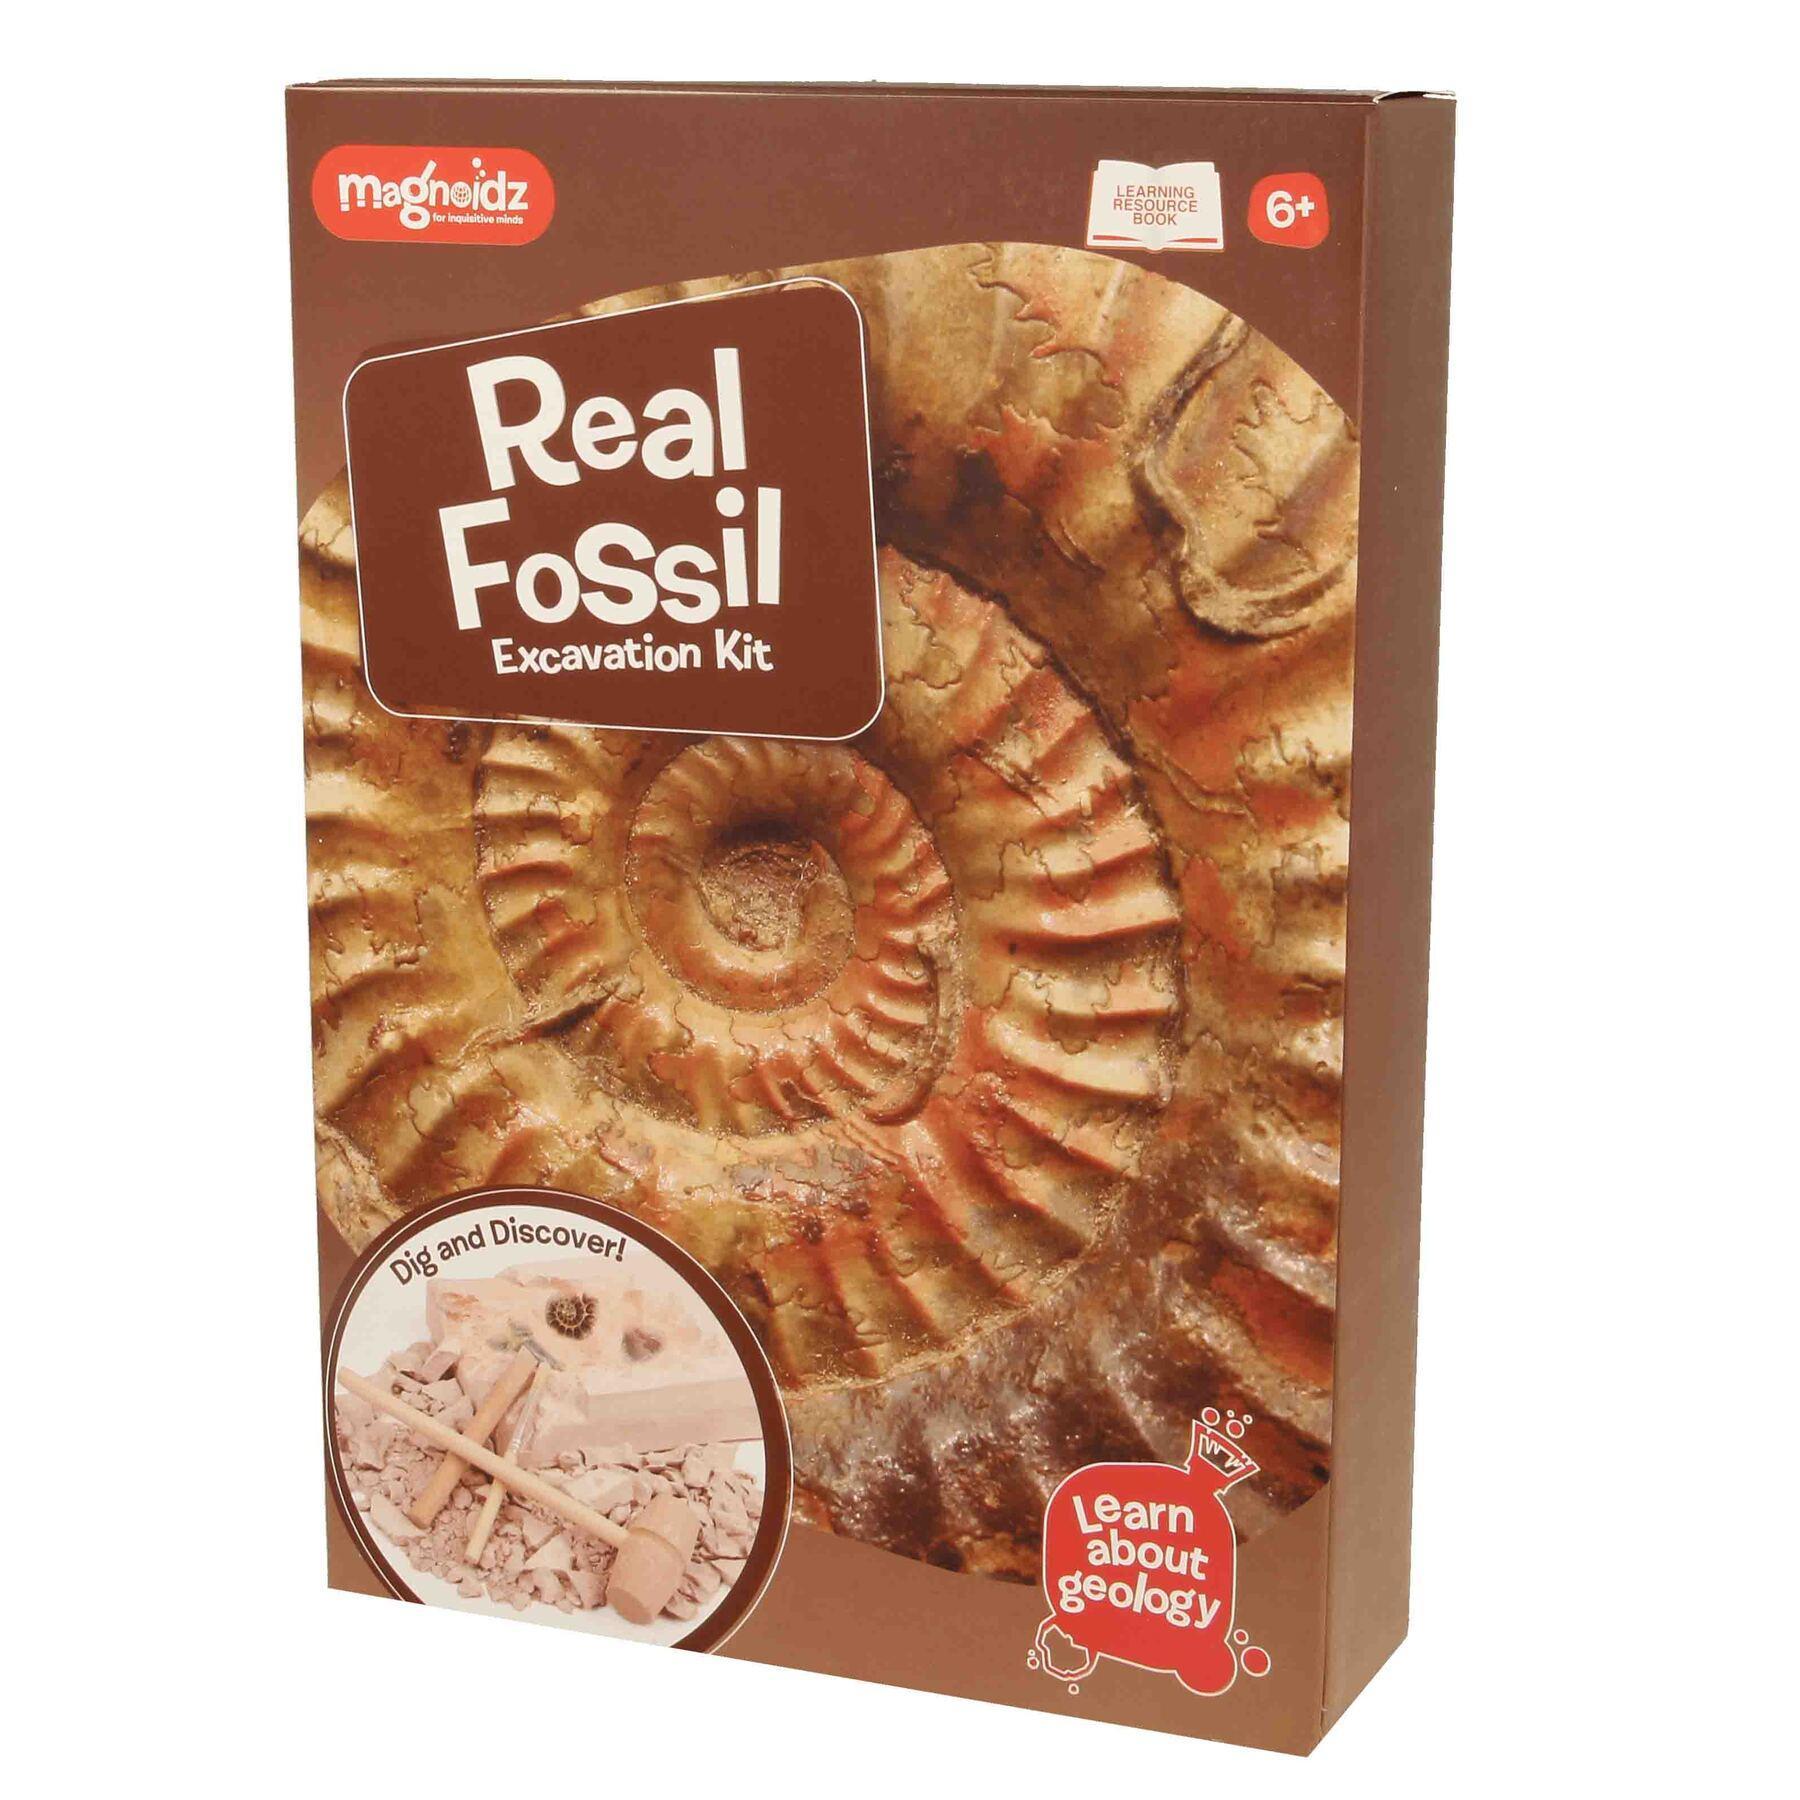 Magnoidz - Real Fossil Excavation Kit - Geology Creative Learning Fun **NEW**